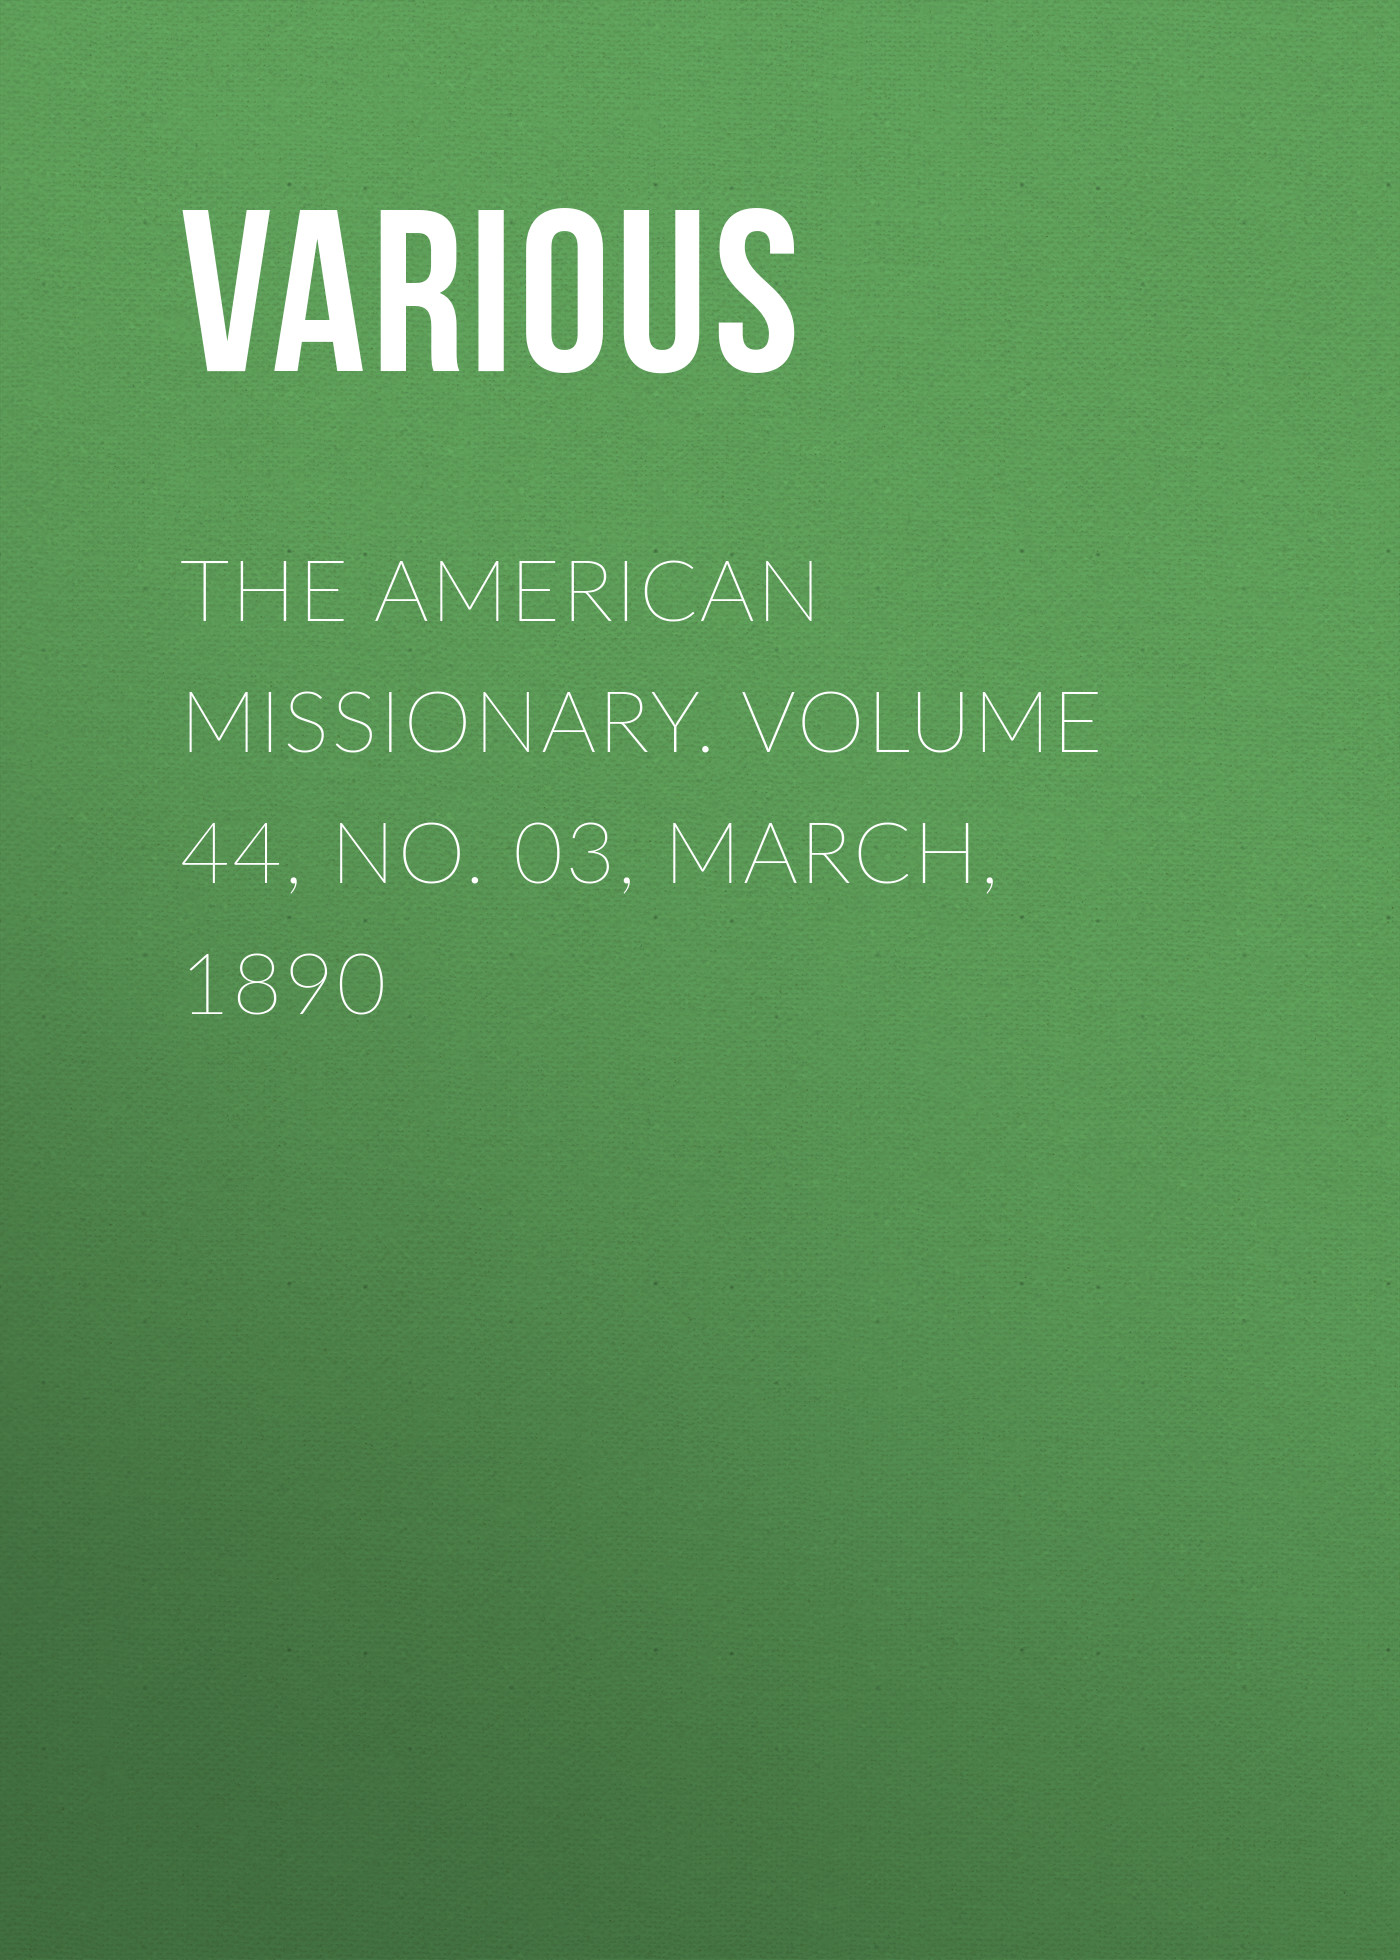 The American Missionary. Volume 44, No. 03, March, 1890